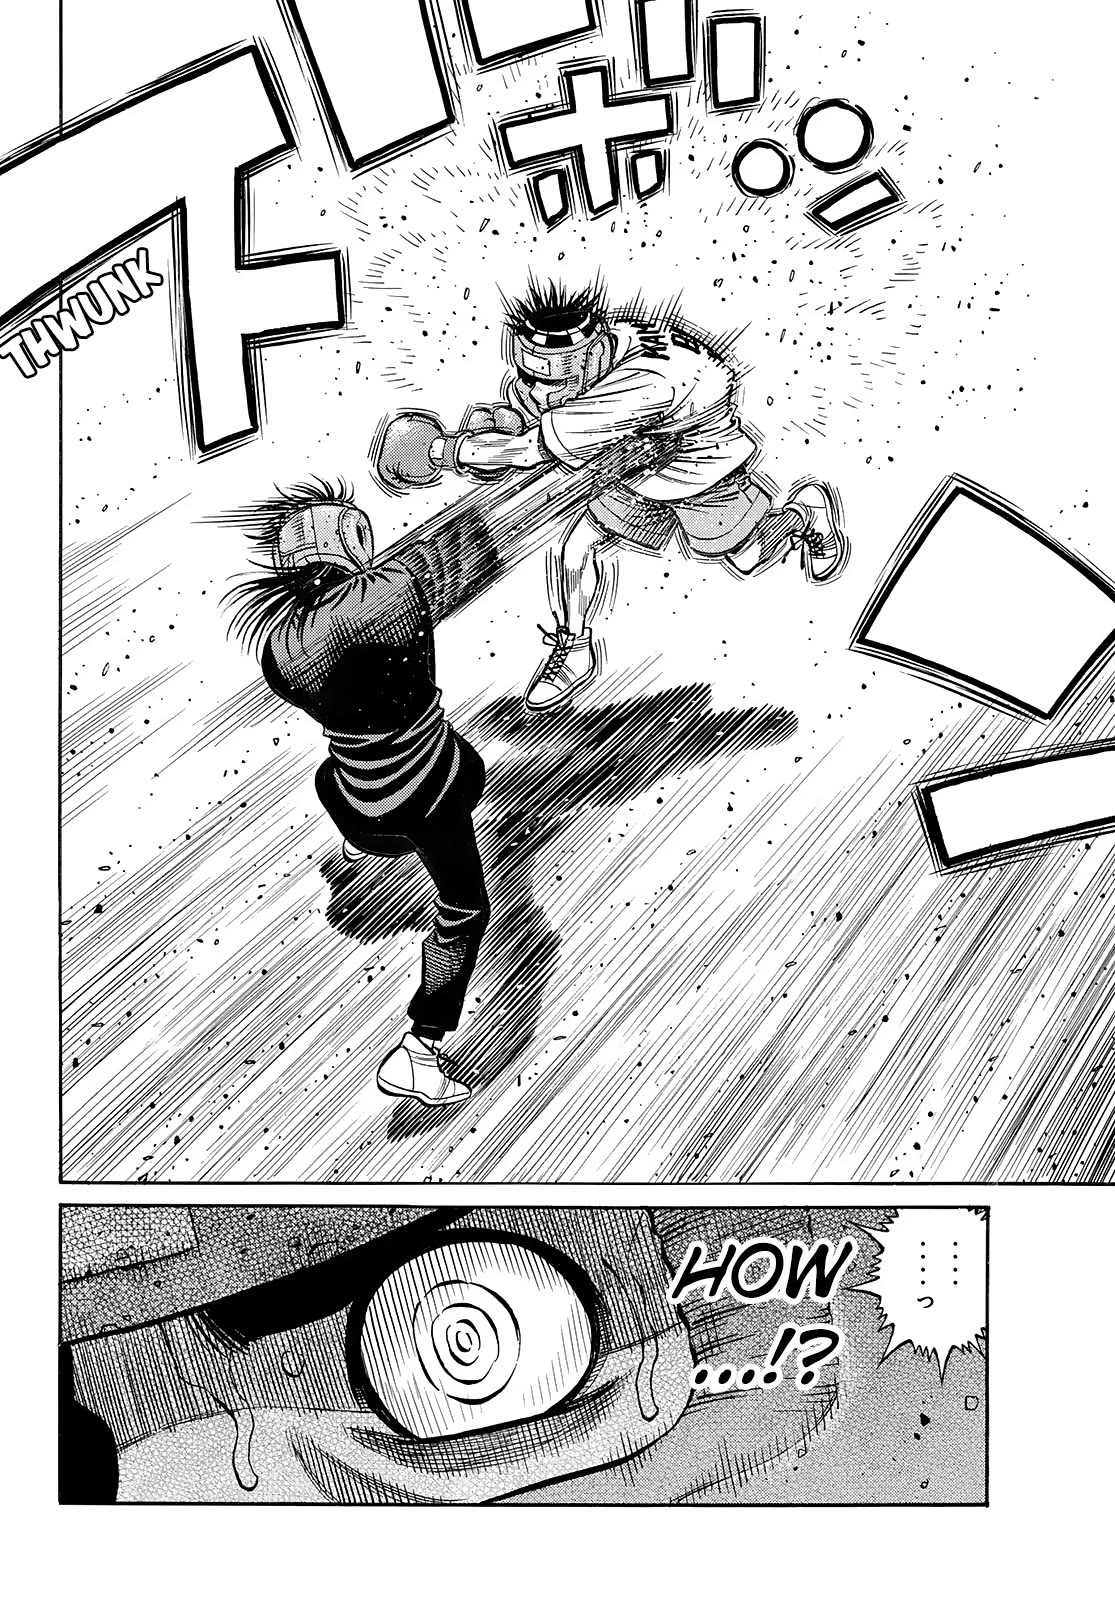 Hajime no Ippo, Chapter 1438 Title Fight Strategy image 5